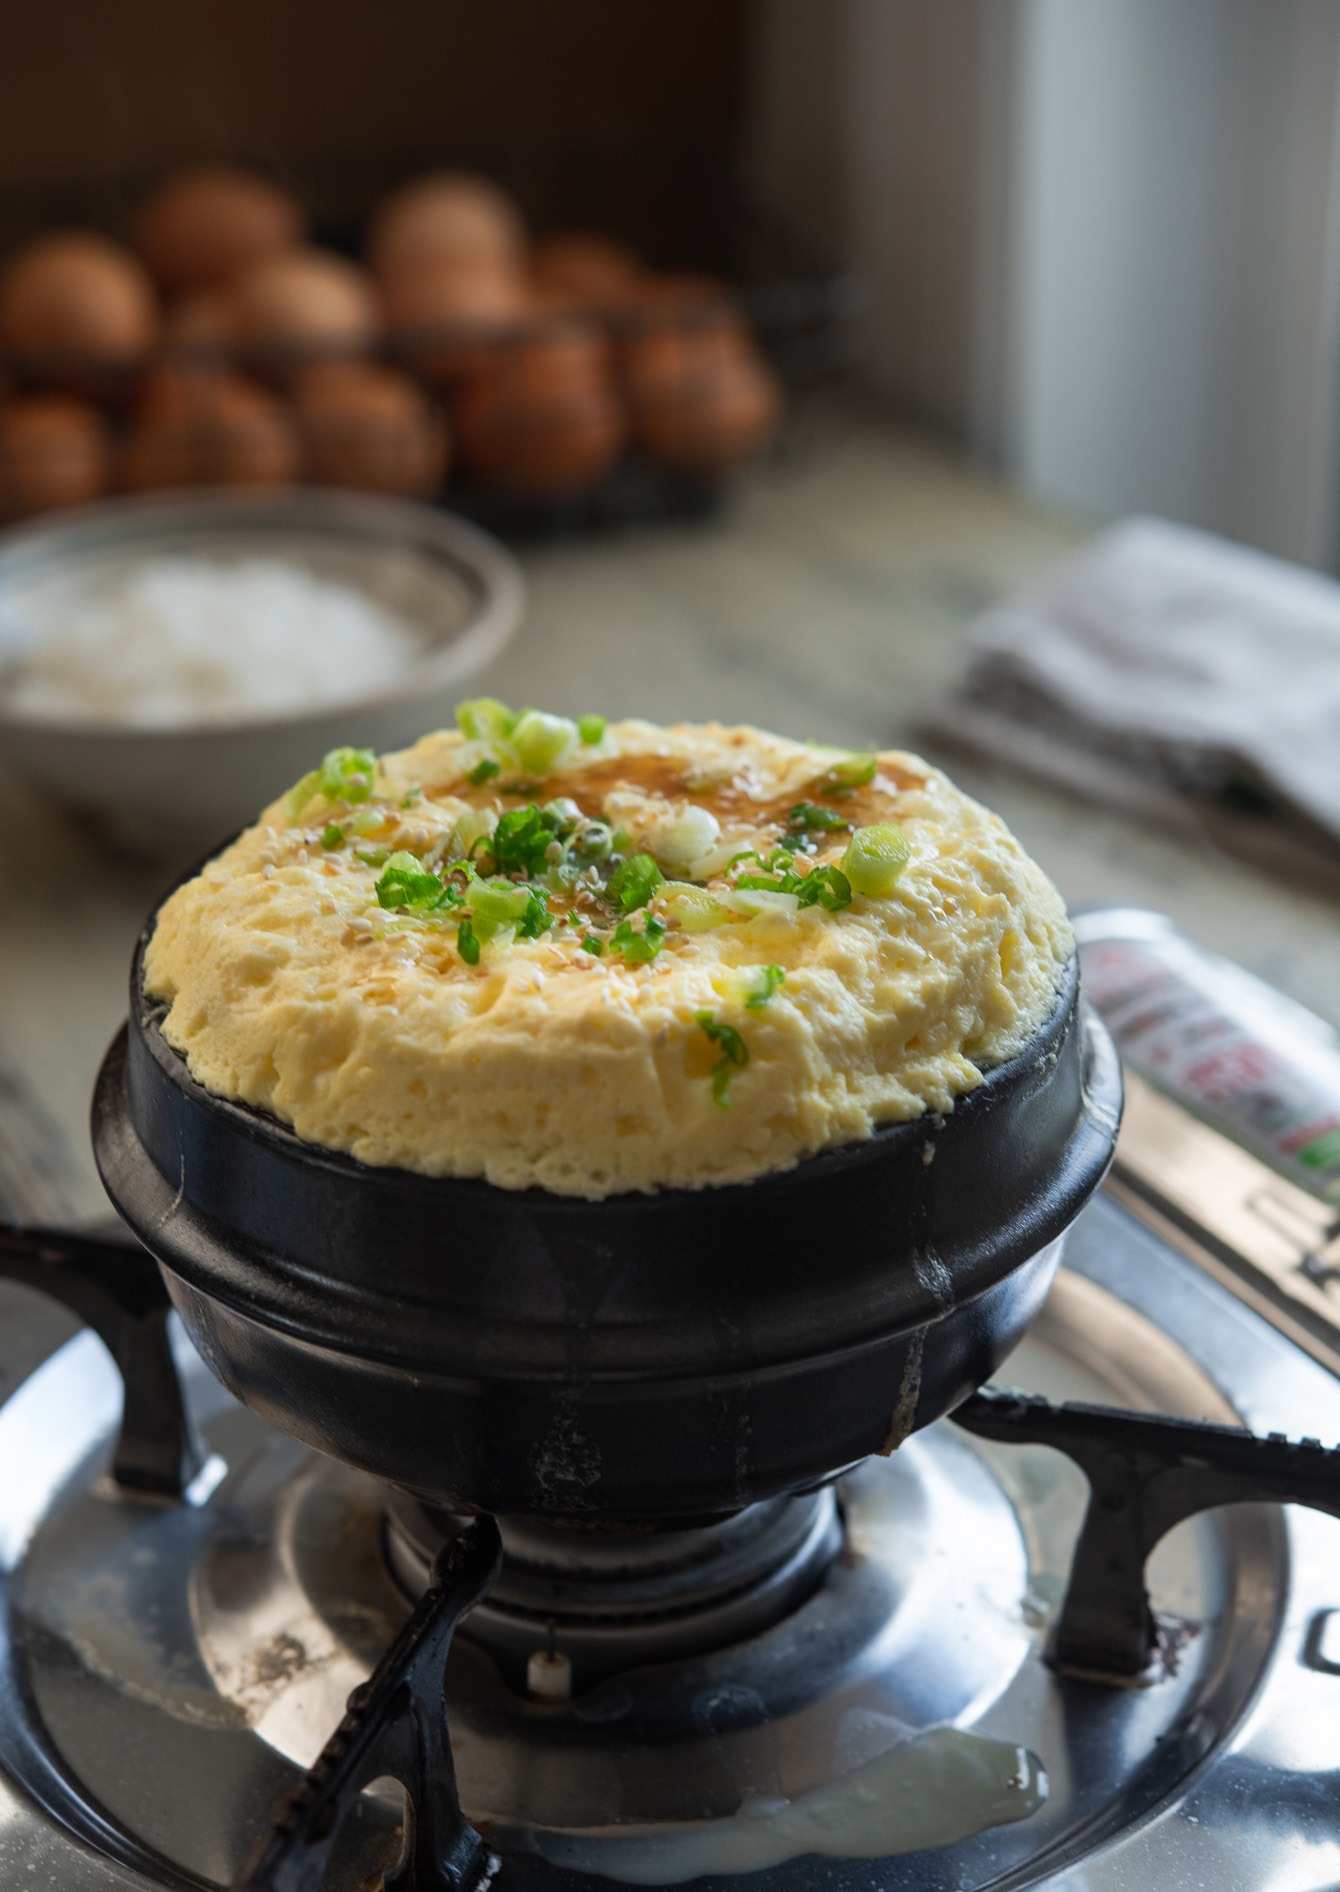 Korean steamed egg in a stone pot garnished with green onion.